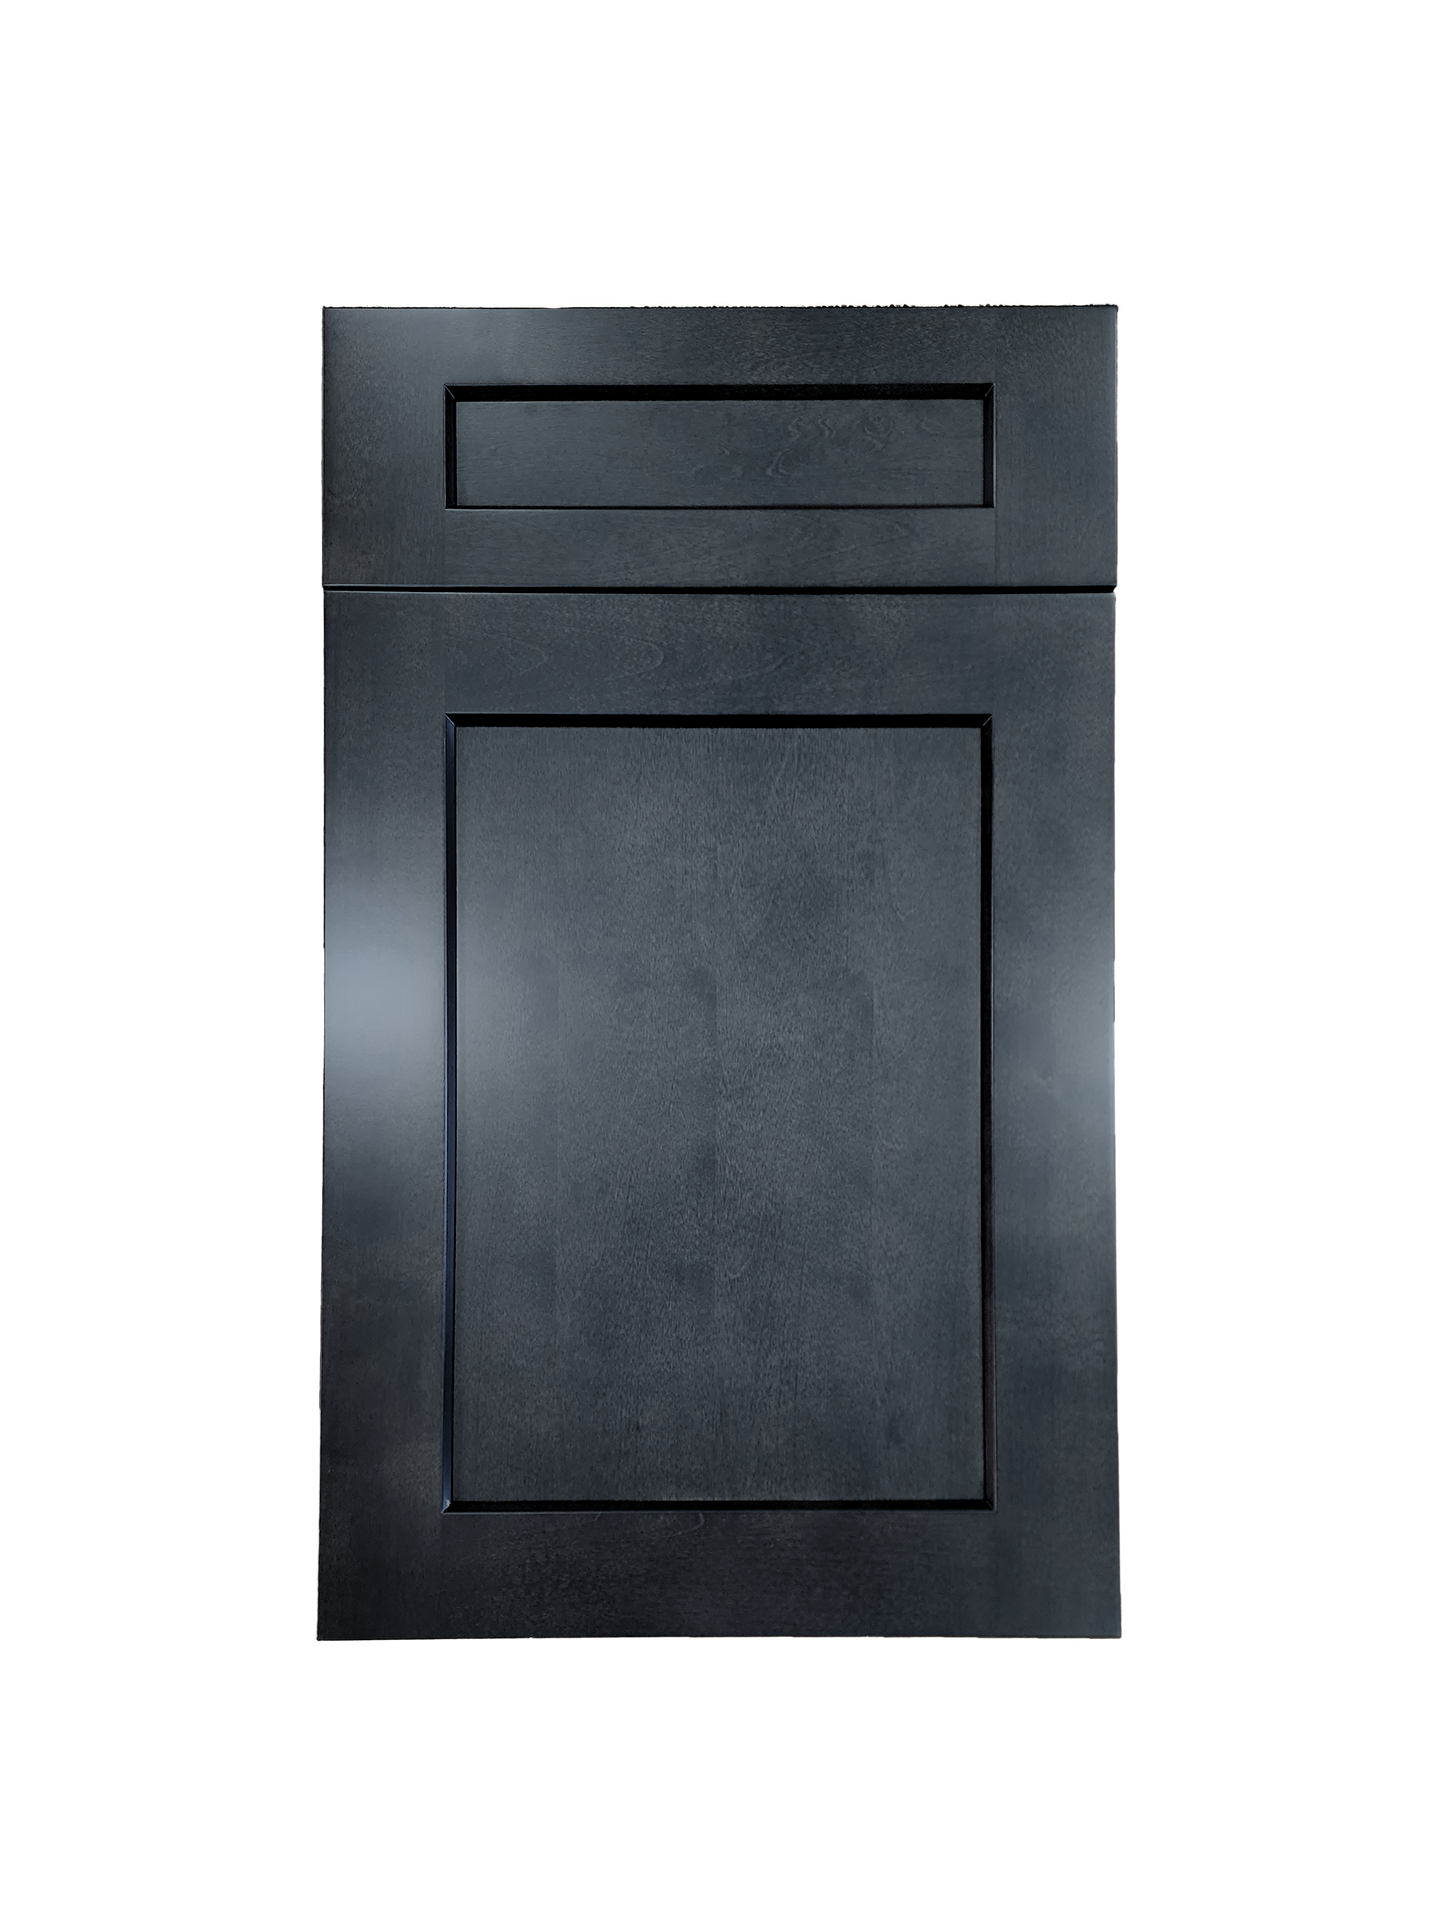 Stormy Grey Wall Cabinet 36 inches wide 12 inches deep 12 inches tall with Stormy Grey box and Stormy Grey doors